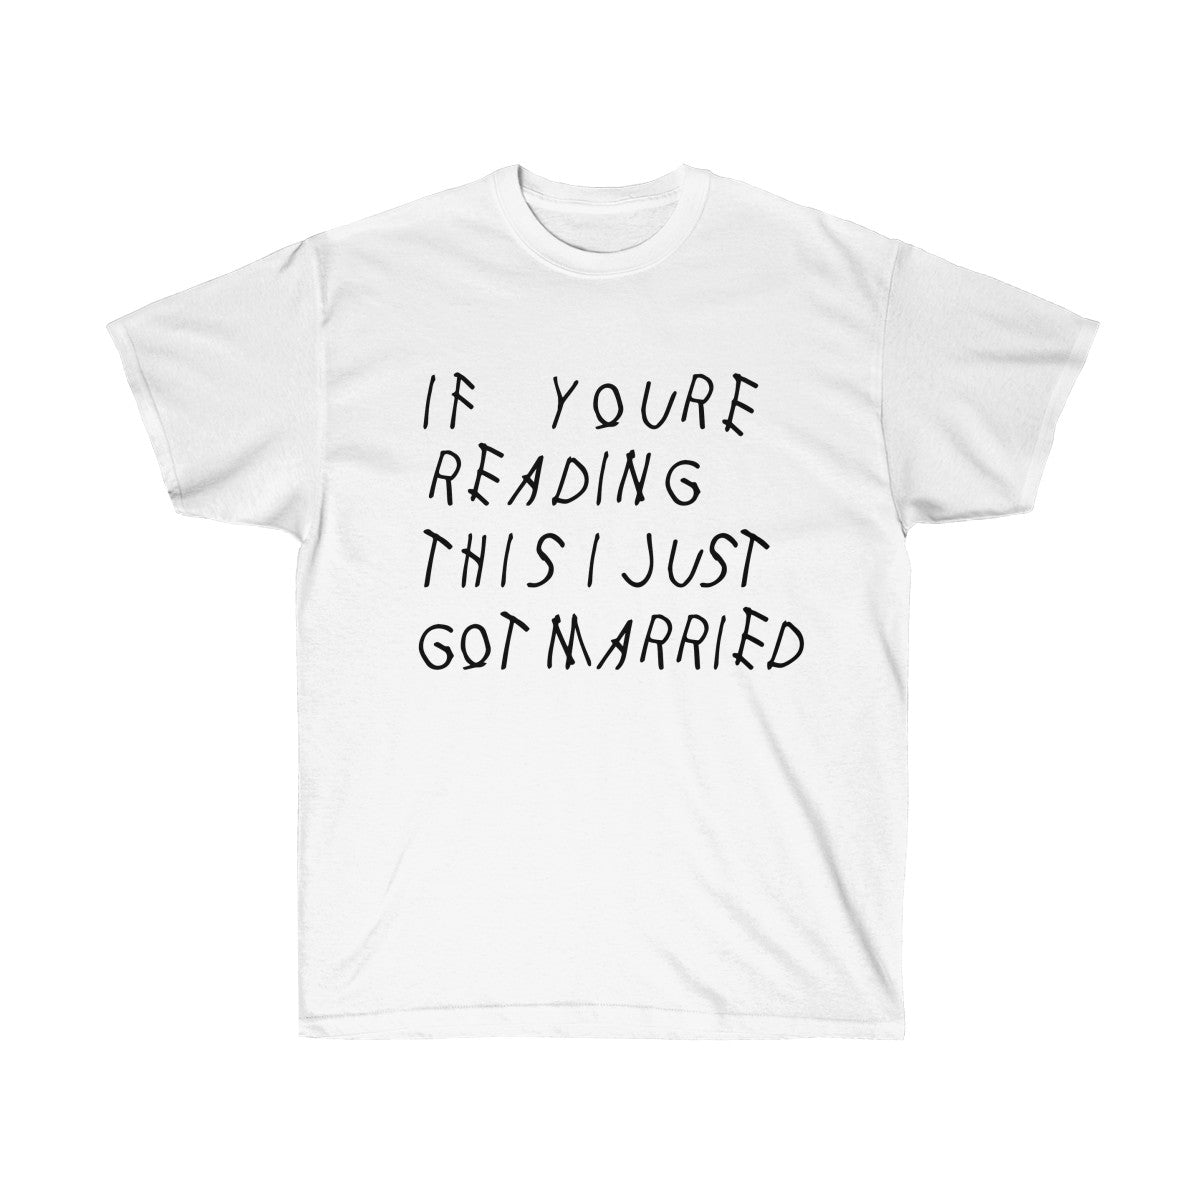 If your reading this I Just Got Married Drake inspired Unisex Ultra Cotton Tee-White-L-Archethype